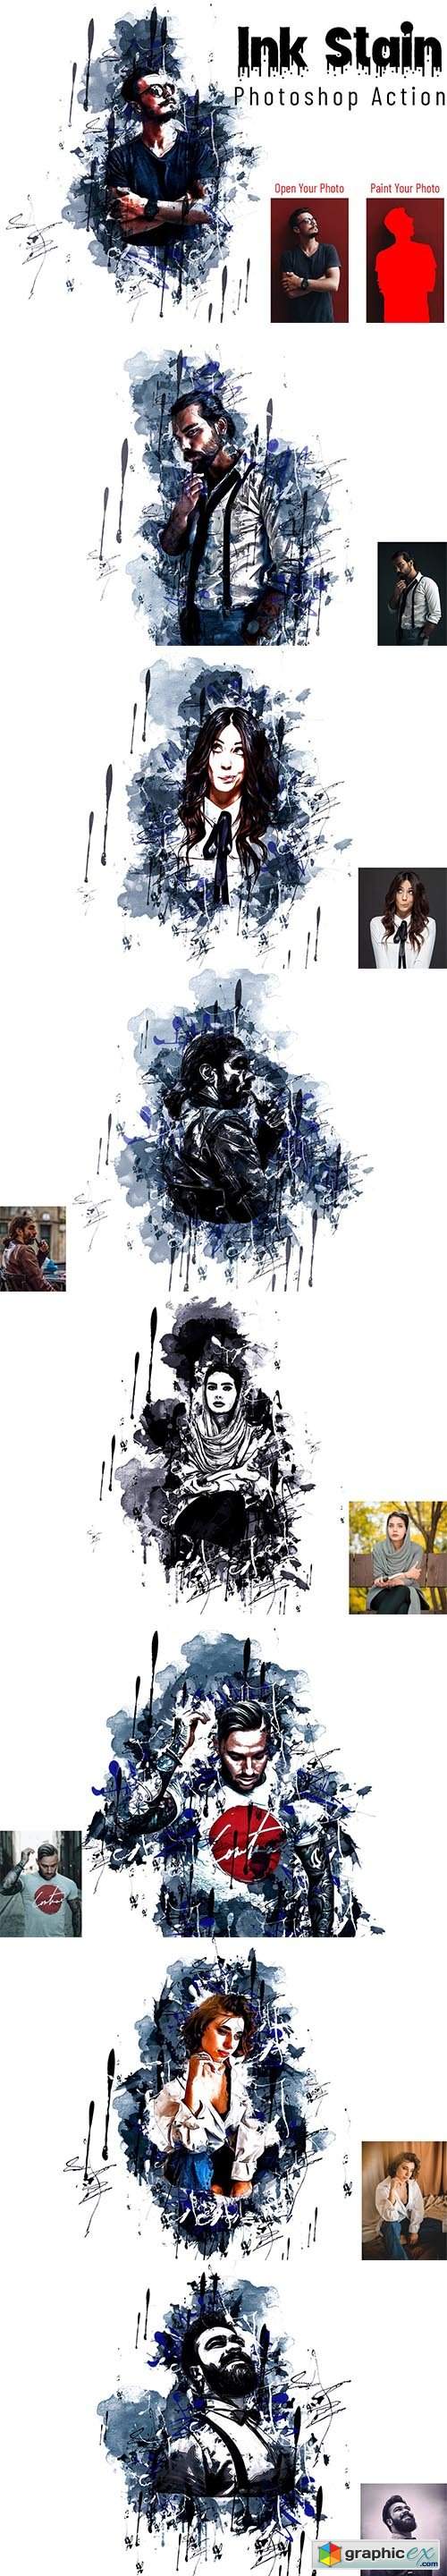 Ink Stain Photoshop Action 